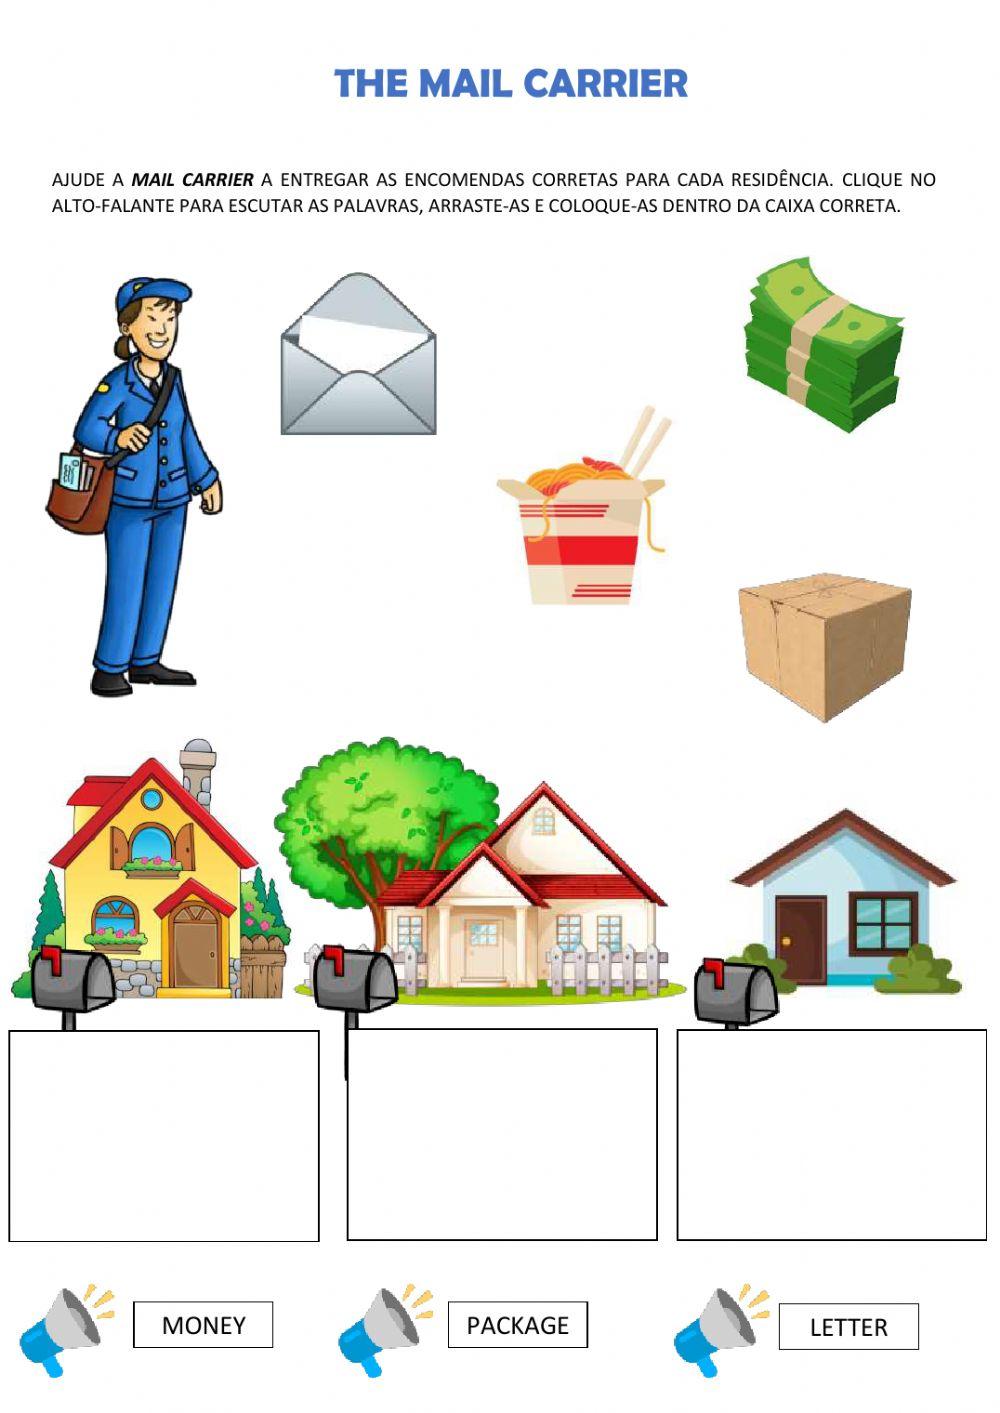 Community helpers: the Mail Carrier